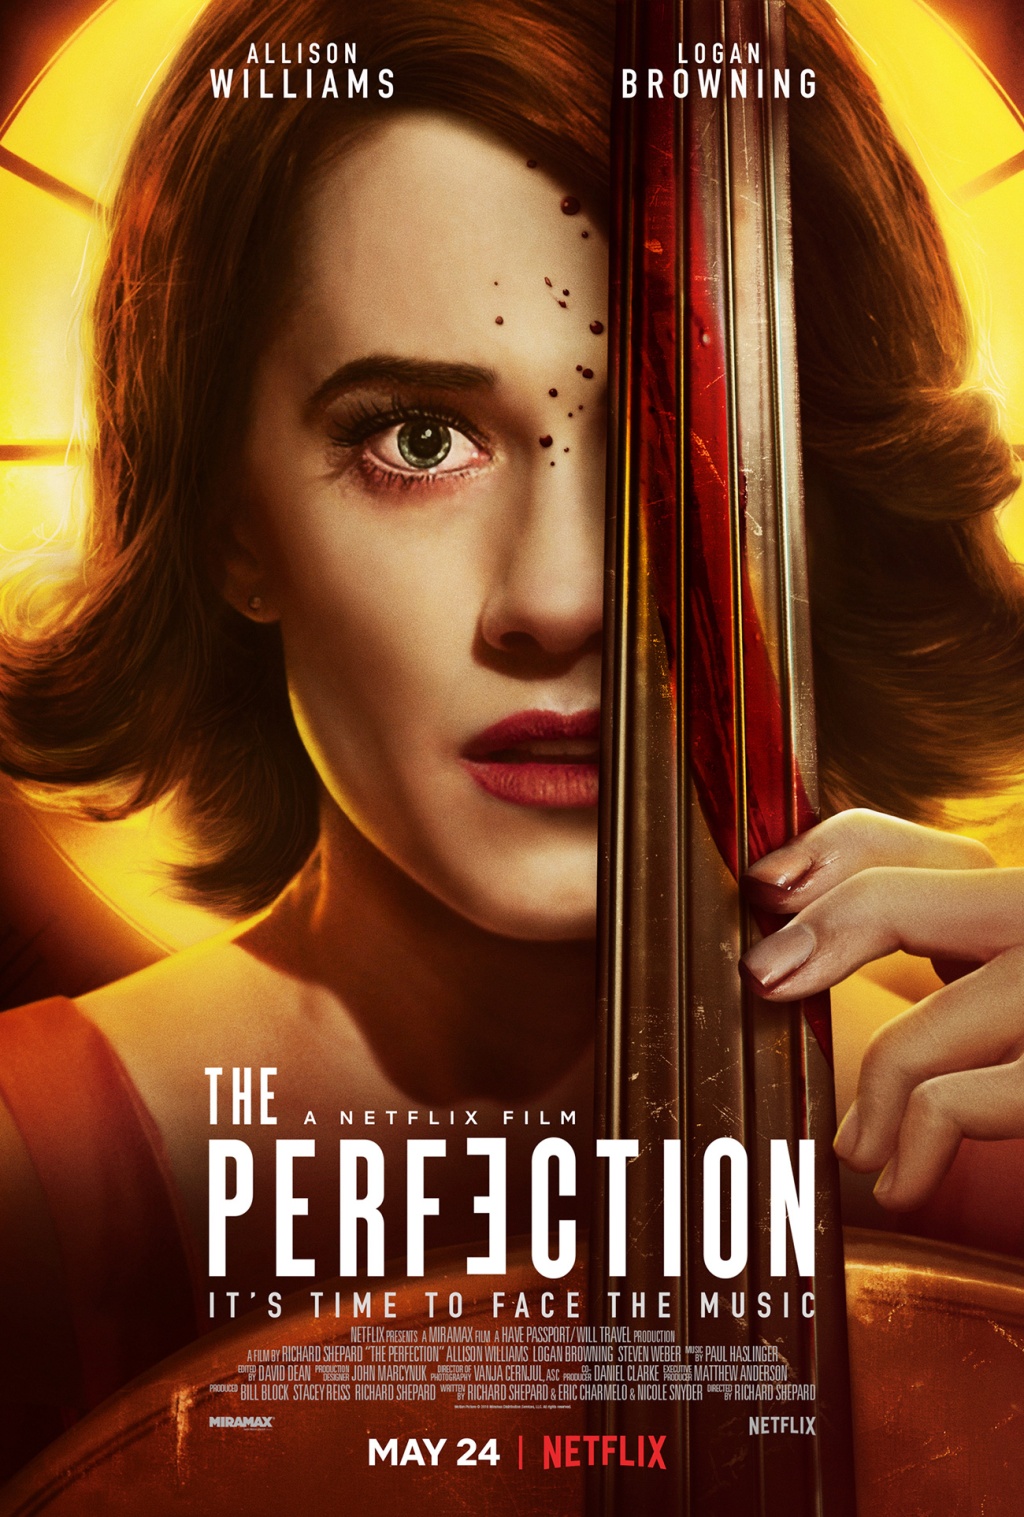 The Perfection (2019) Movie Review